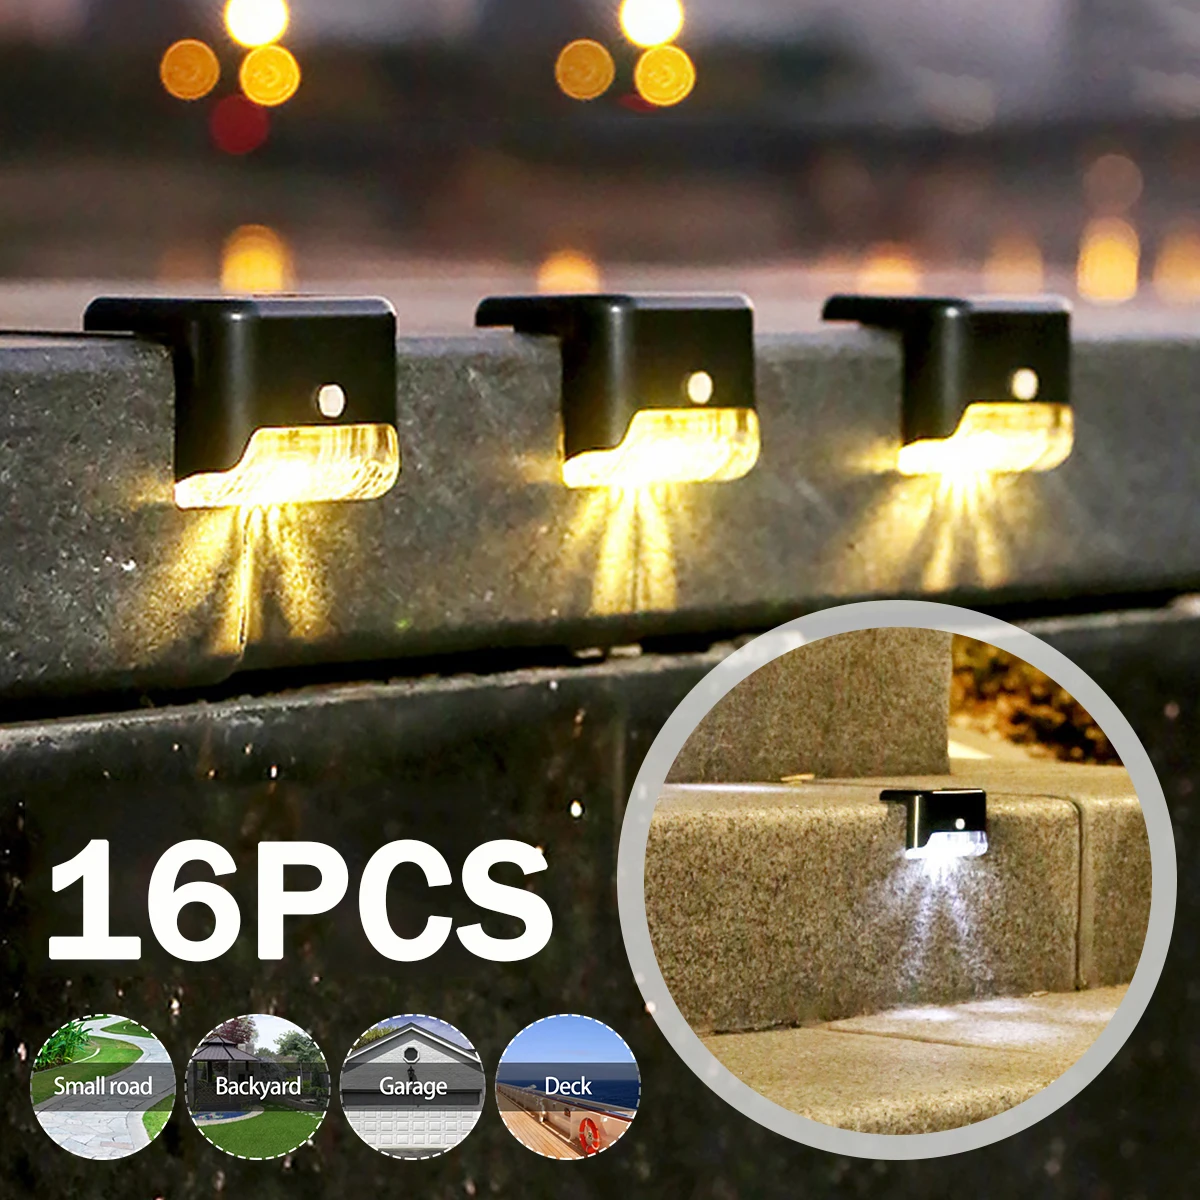 Solar Light Outdoors Ip65 Luces Solares Para Ce Exterior Step Deck Lights Lamps Garden Lighting Fence Courtyard Decor focusable quality super stable 200mw 532nm green laser module stage light rgb laser diode compact design tt l dc 12v luces laze